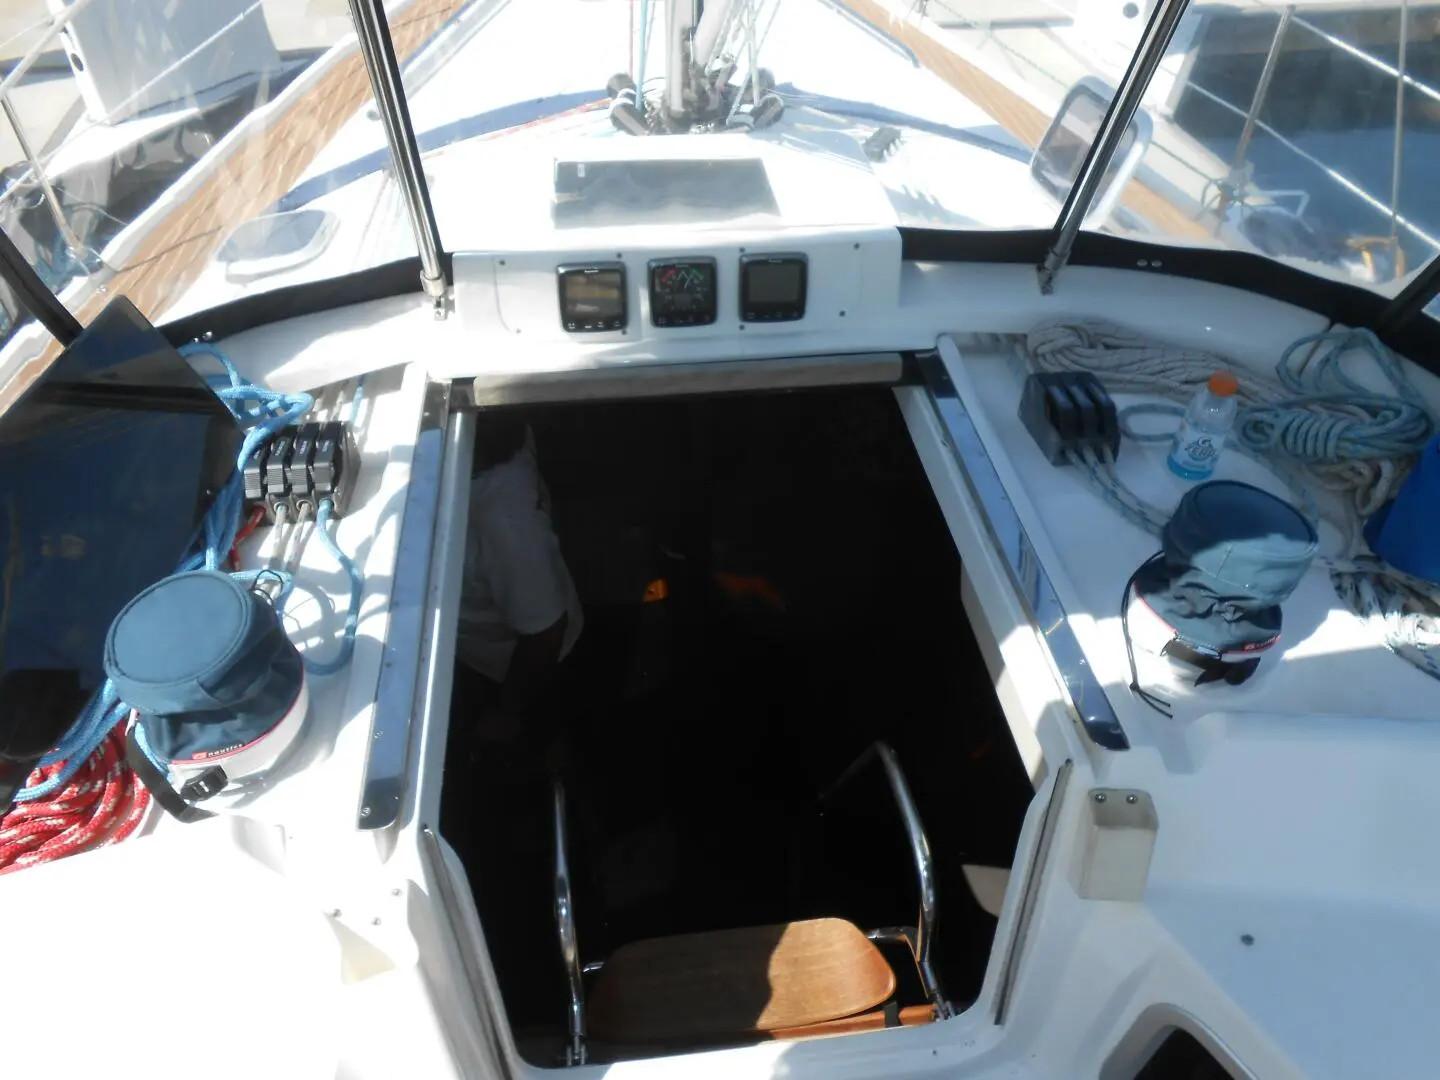 42′ Hunter 2001 Yacht for Sale